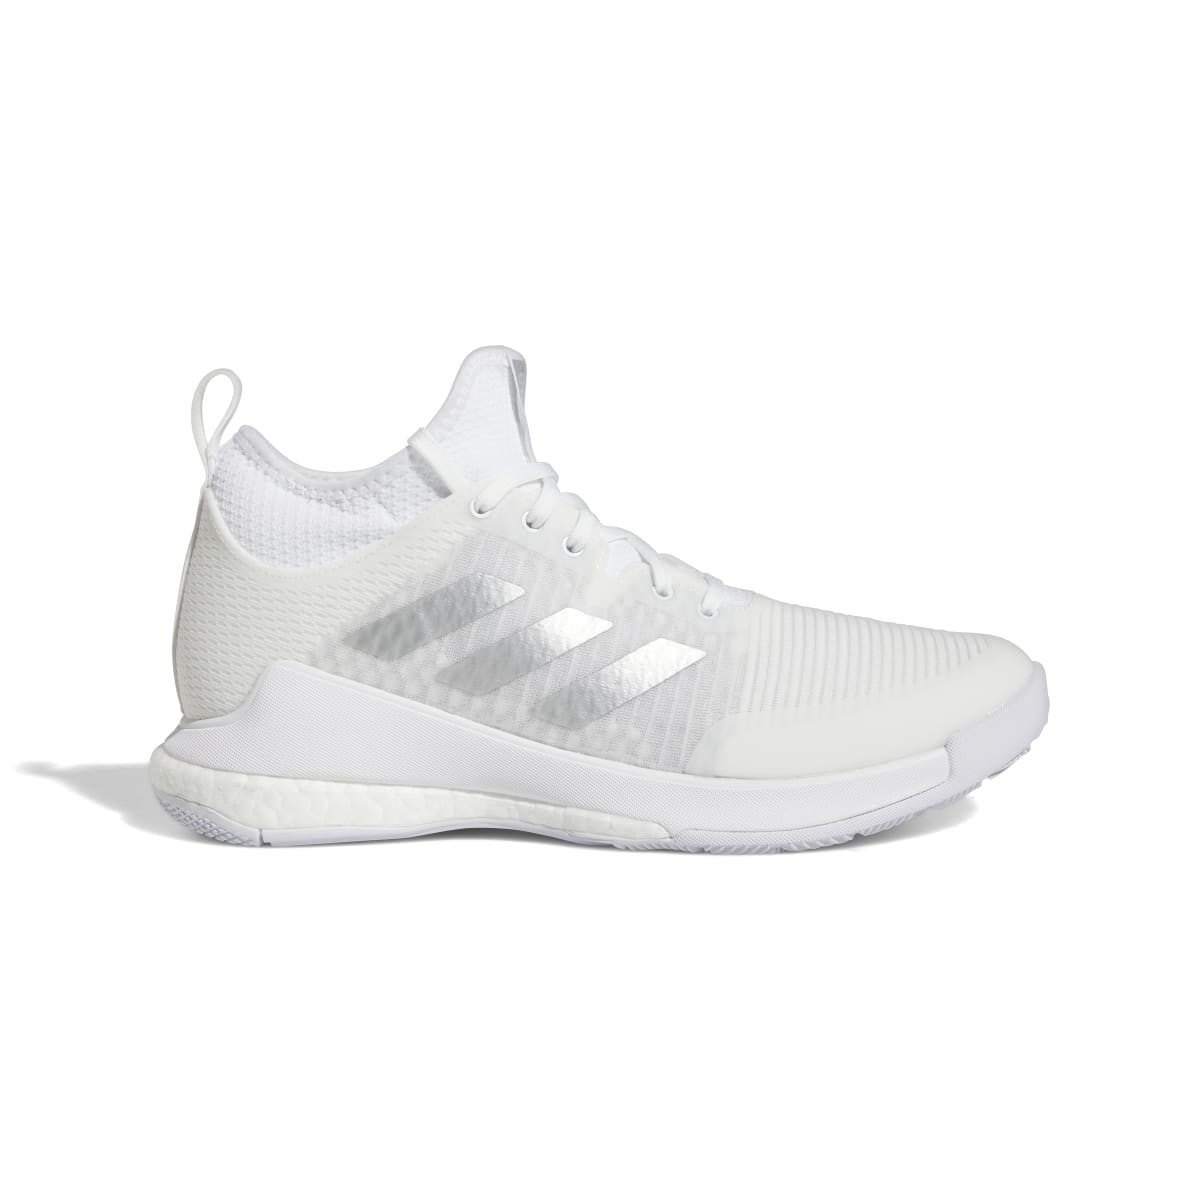 Adidas Crazyflight Mid Volleyball Shoes in White